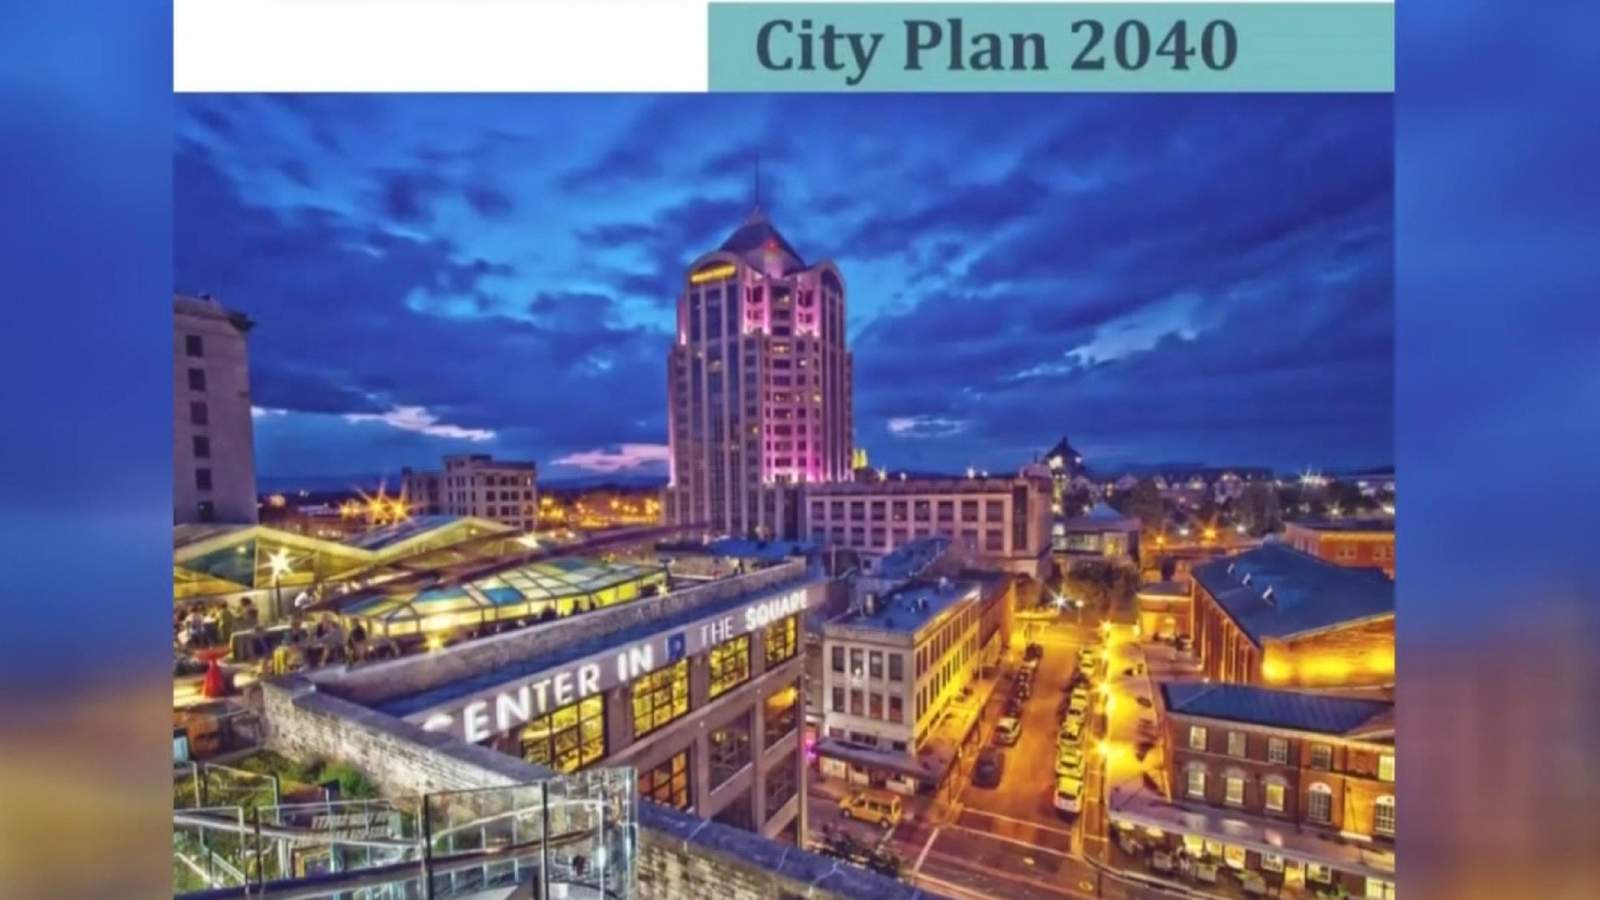 Roanoke City Plan 2040 one step closer to final approval